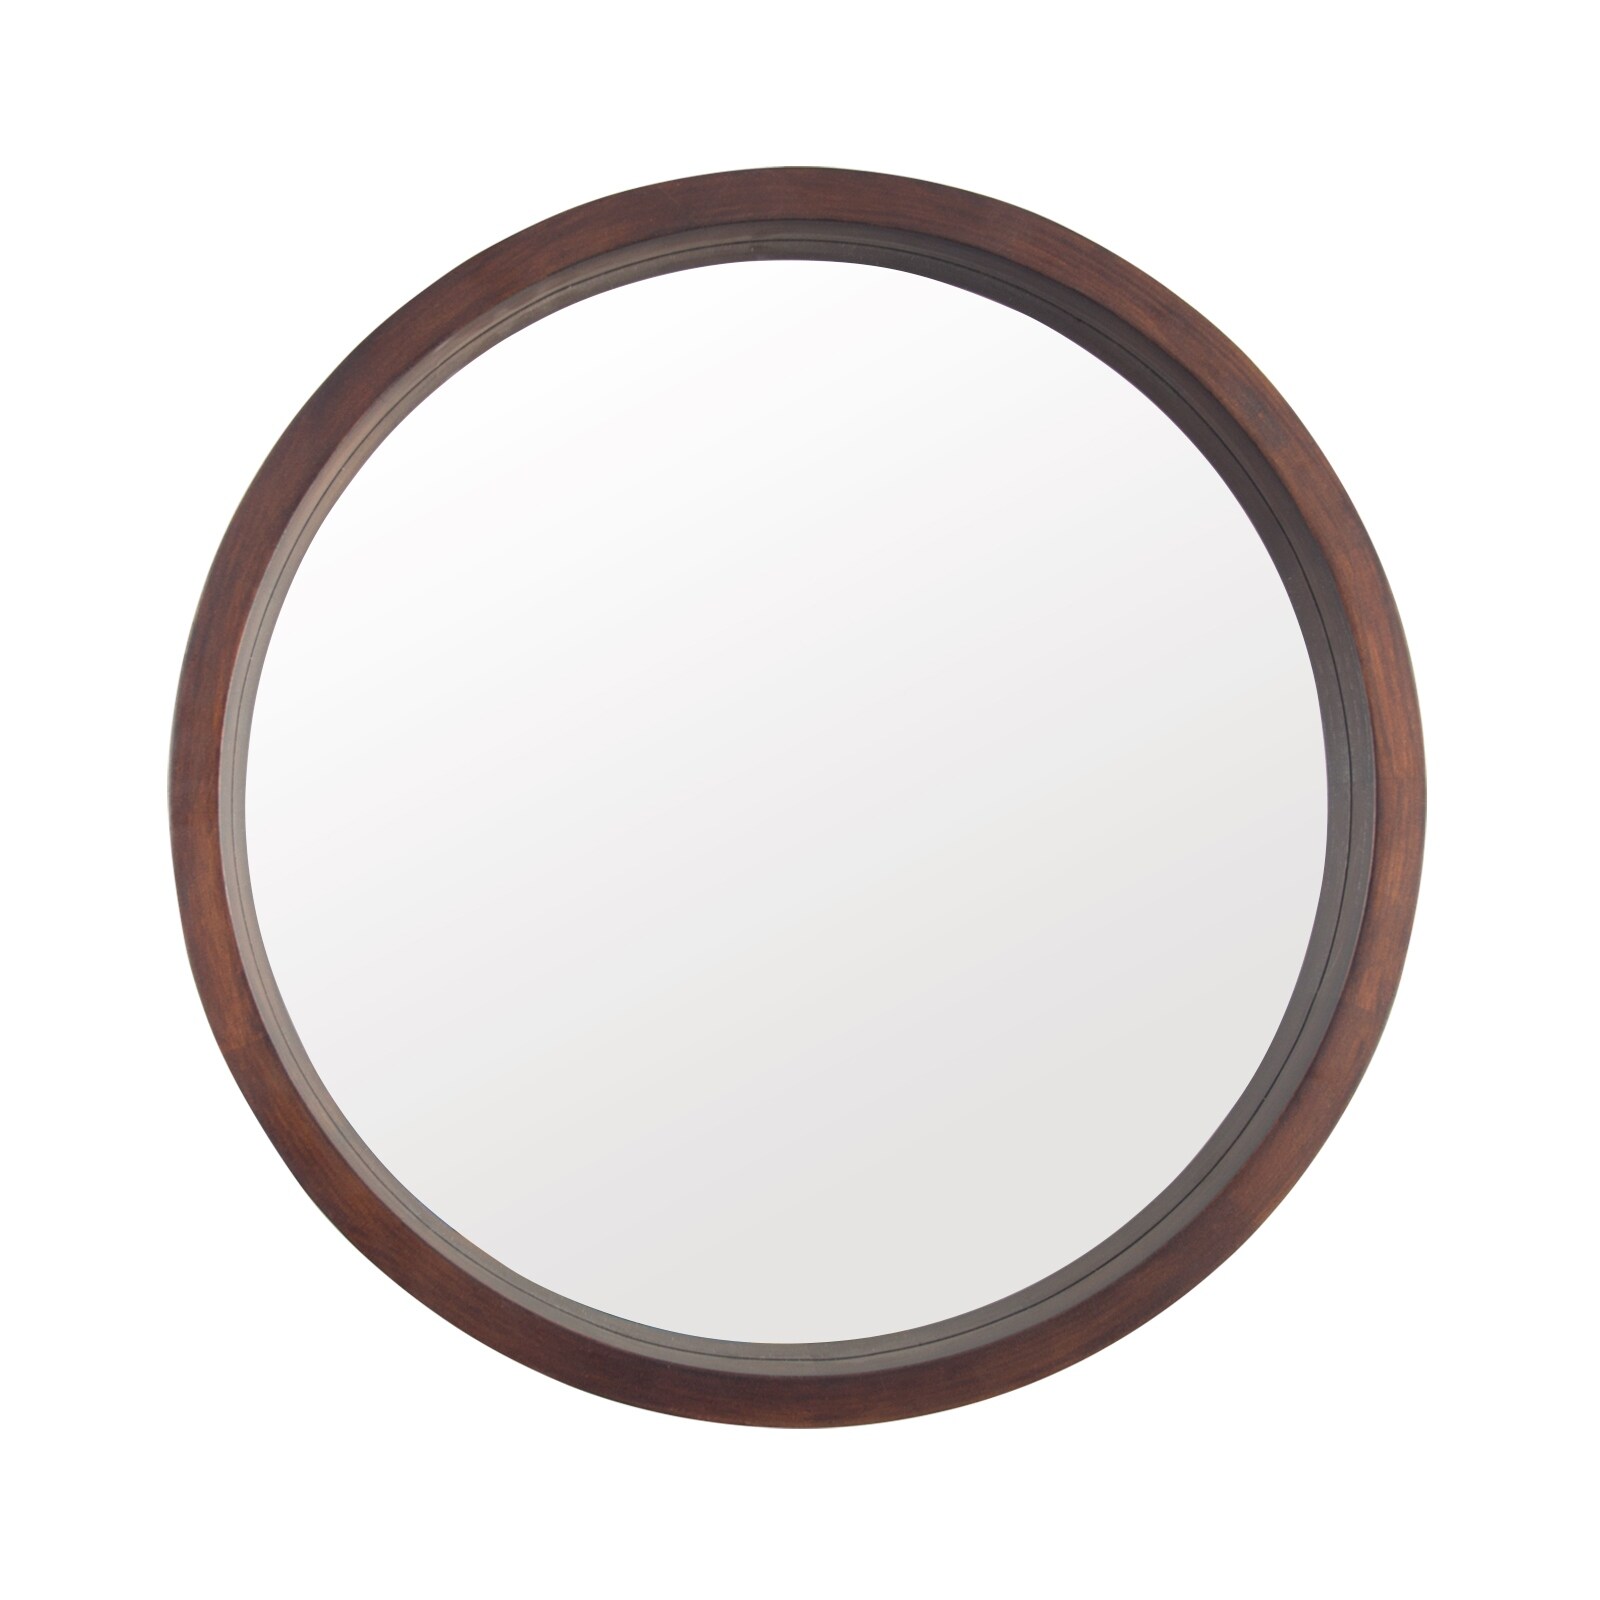 24"Circle Mirror with Wood Frame for Bathroom Living Room Bedroom